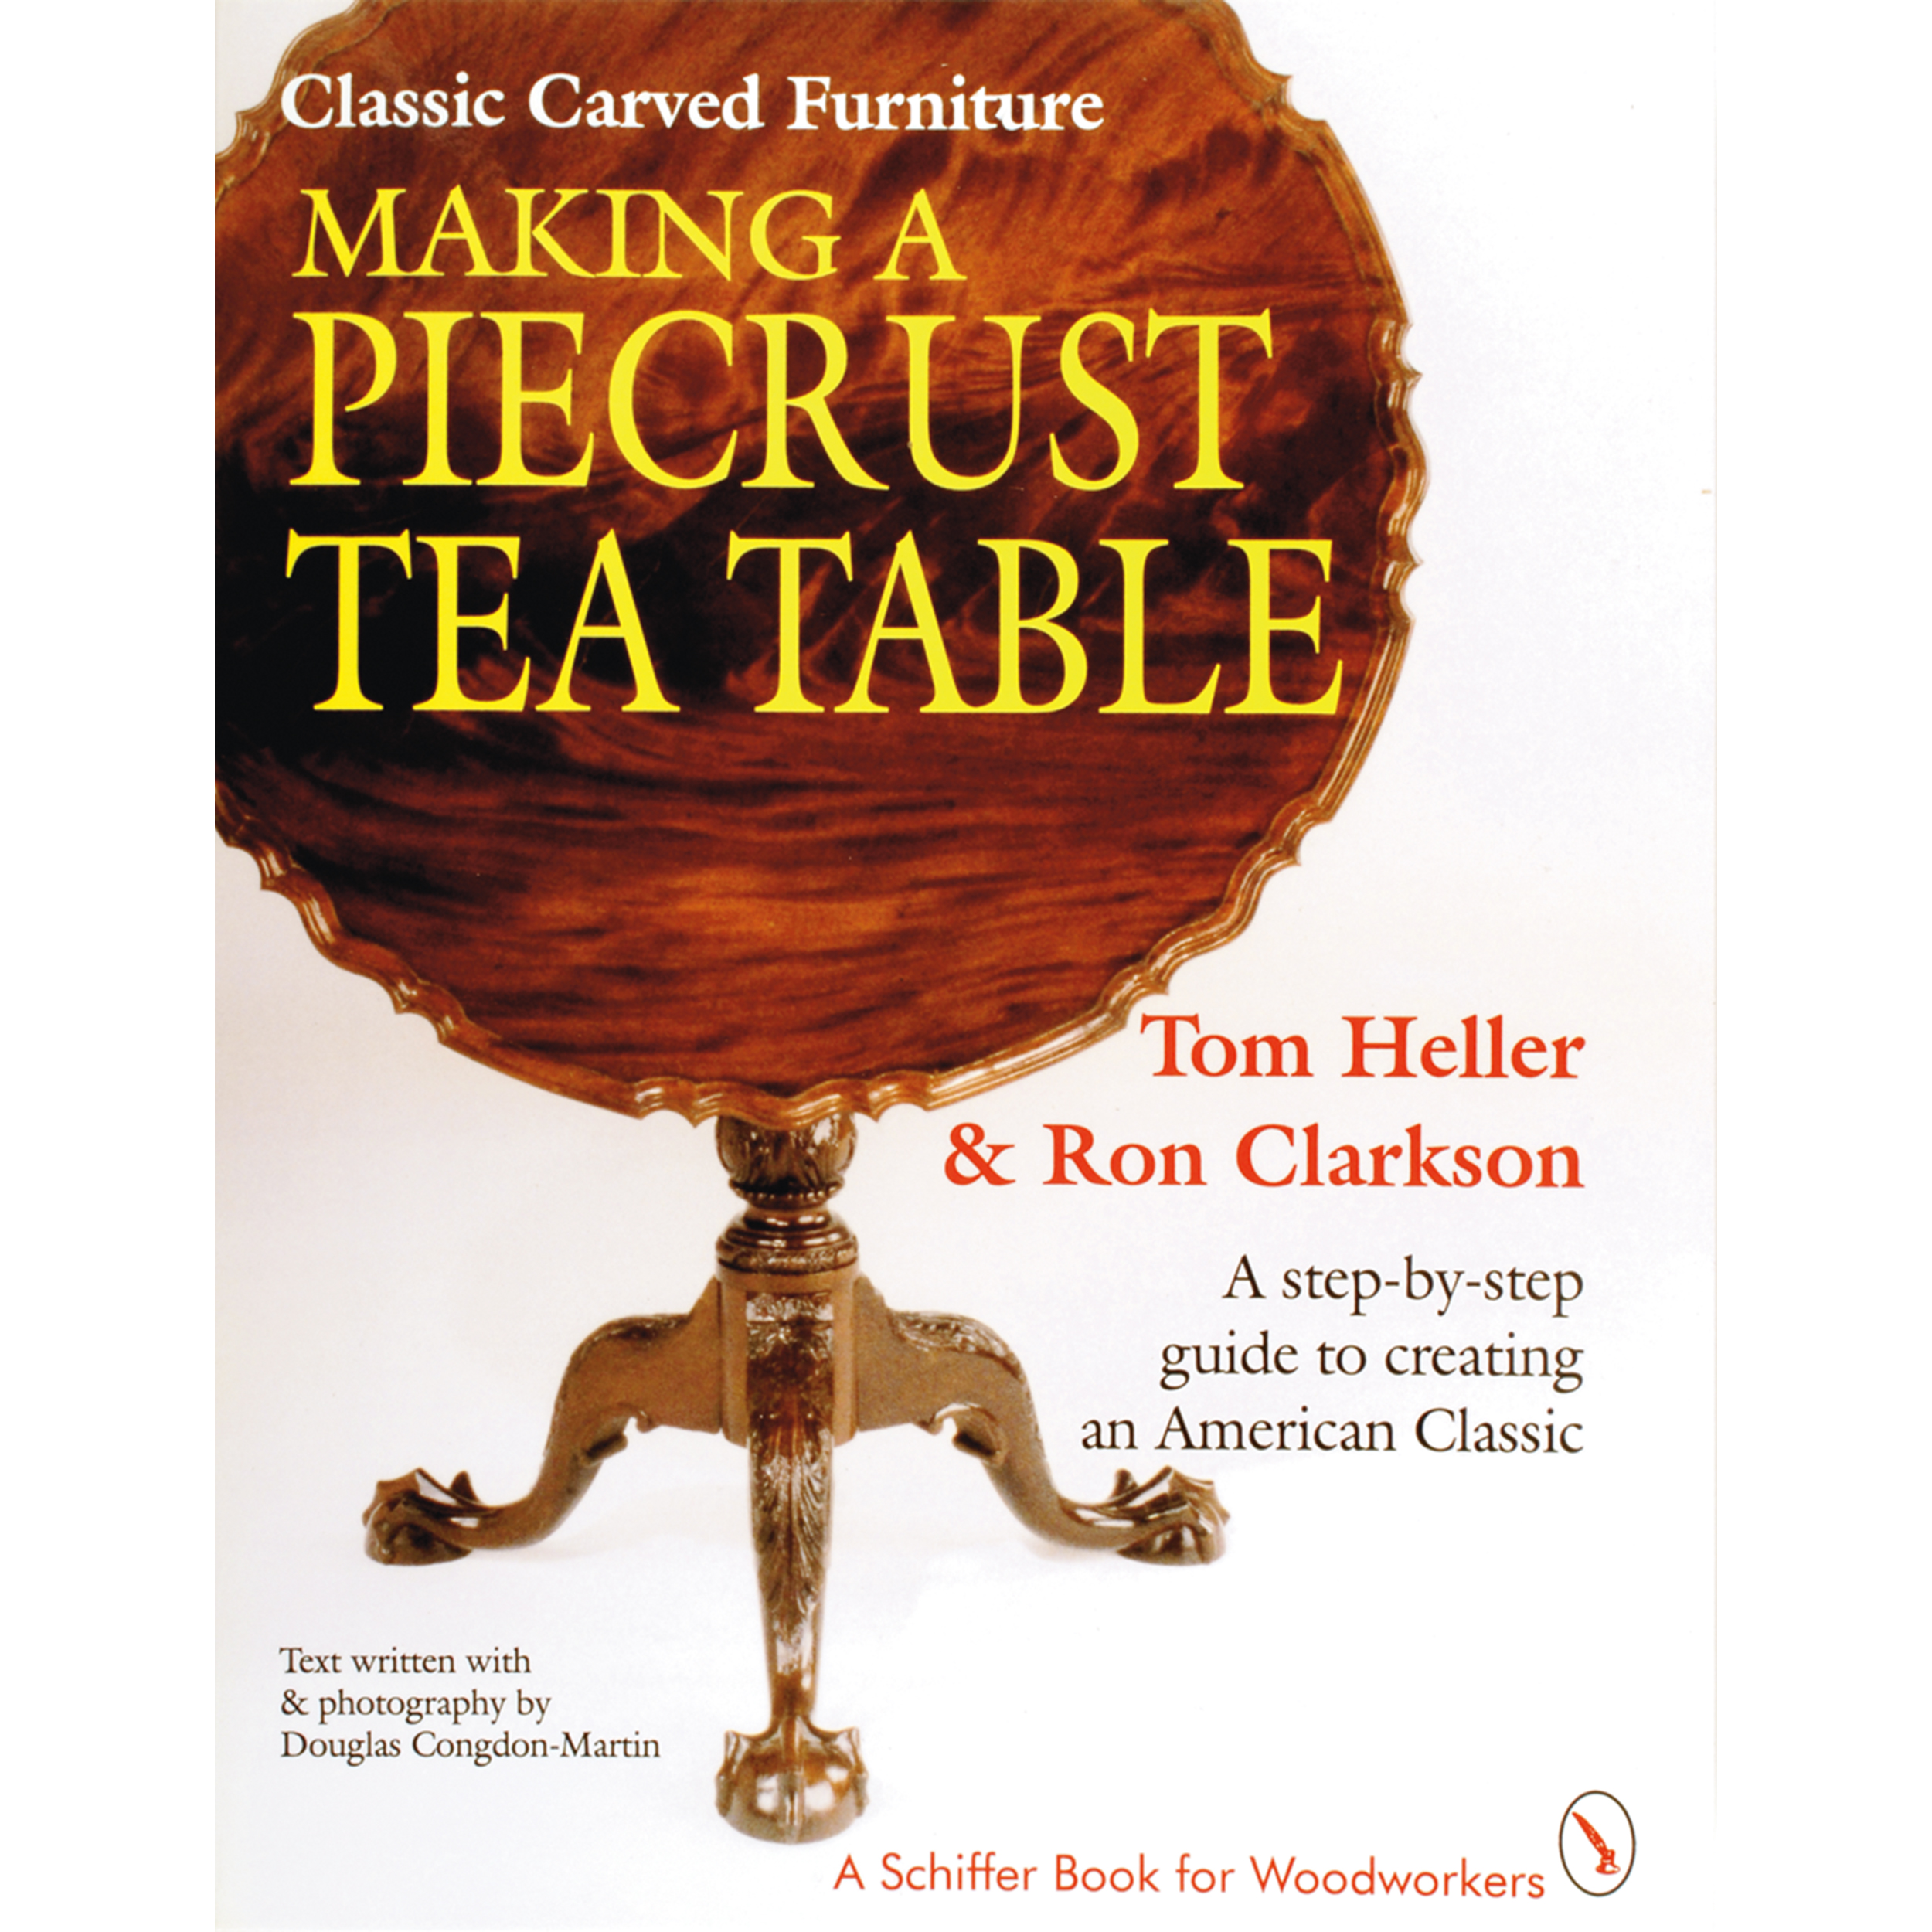 Classic Carved Furniture: Making A Piecrust Tea Table